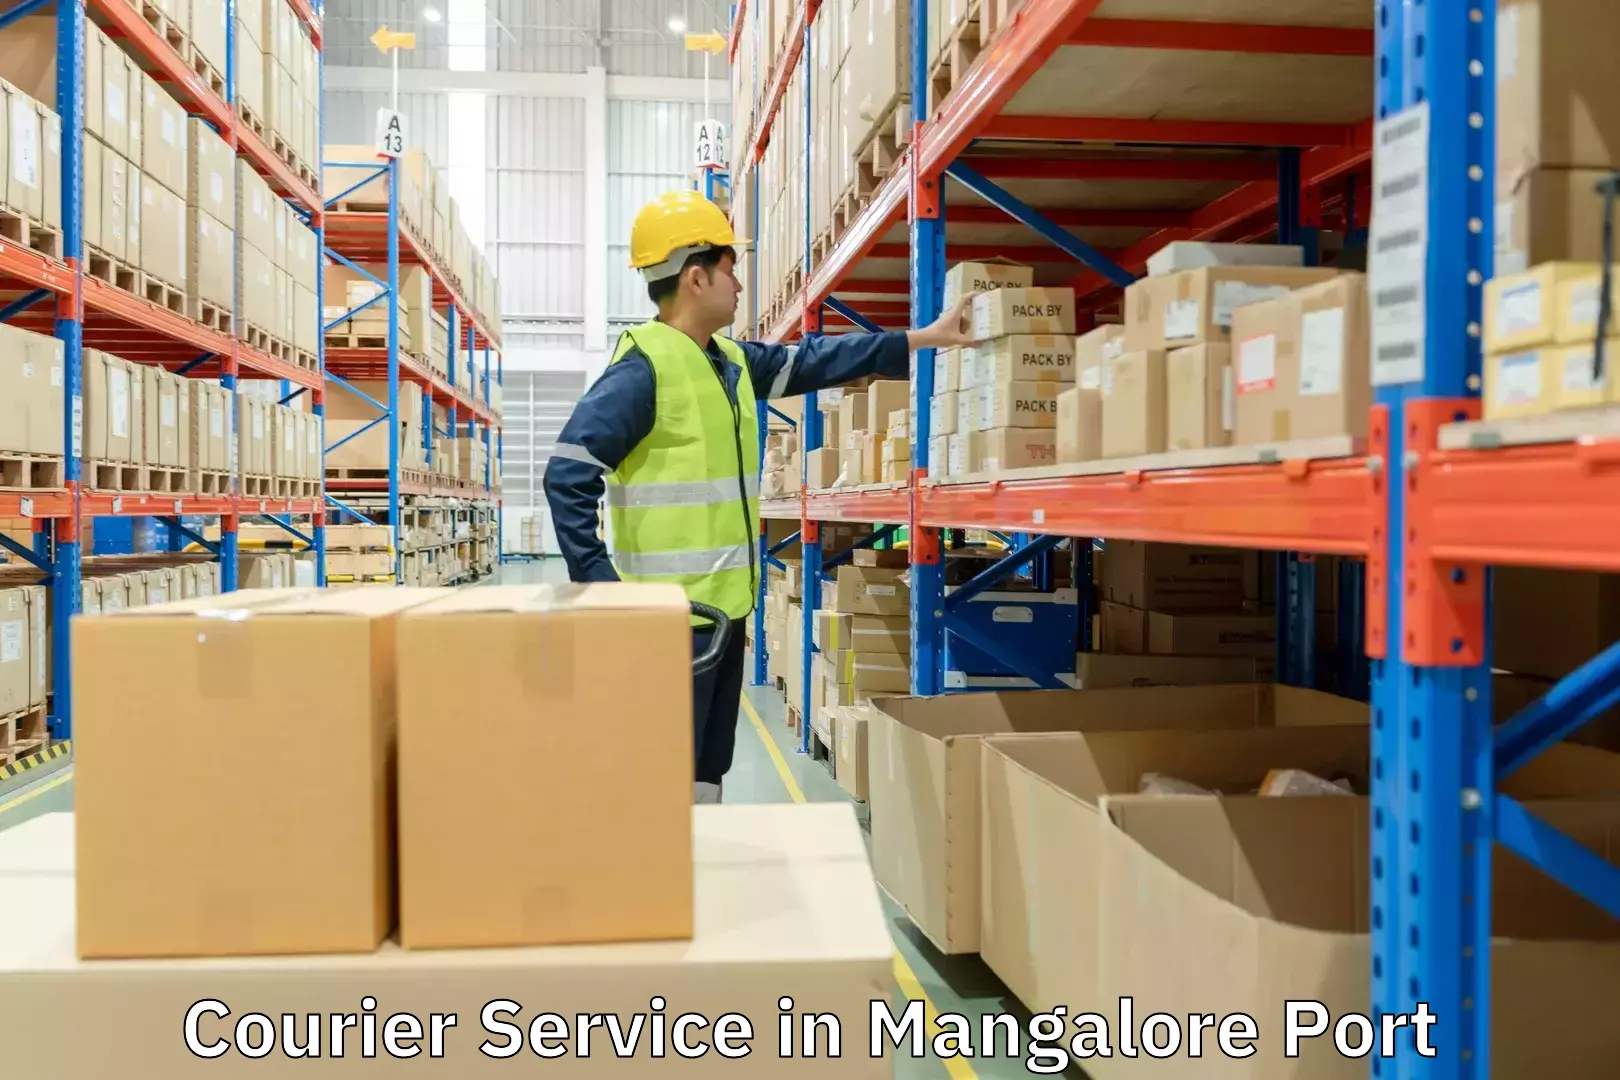 Courier app in Mangalore Port